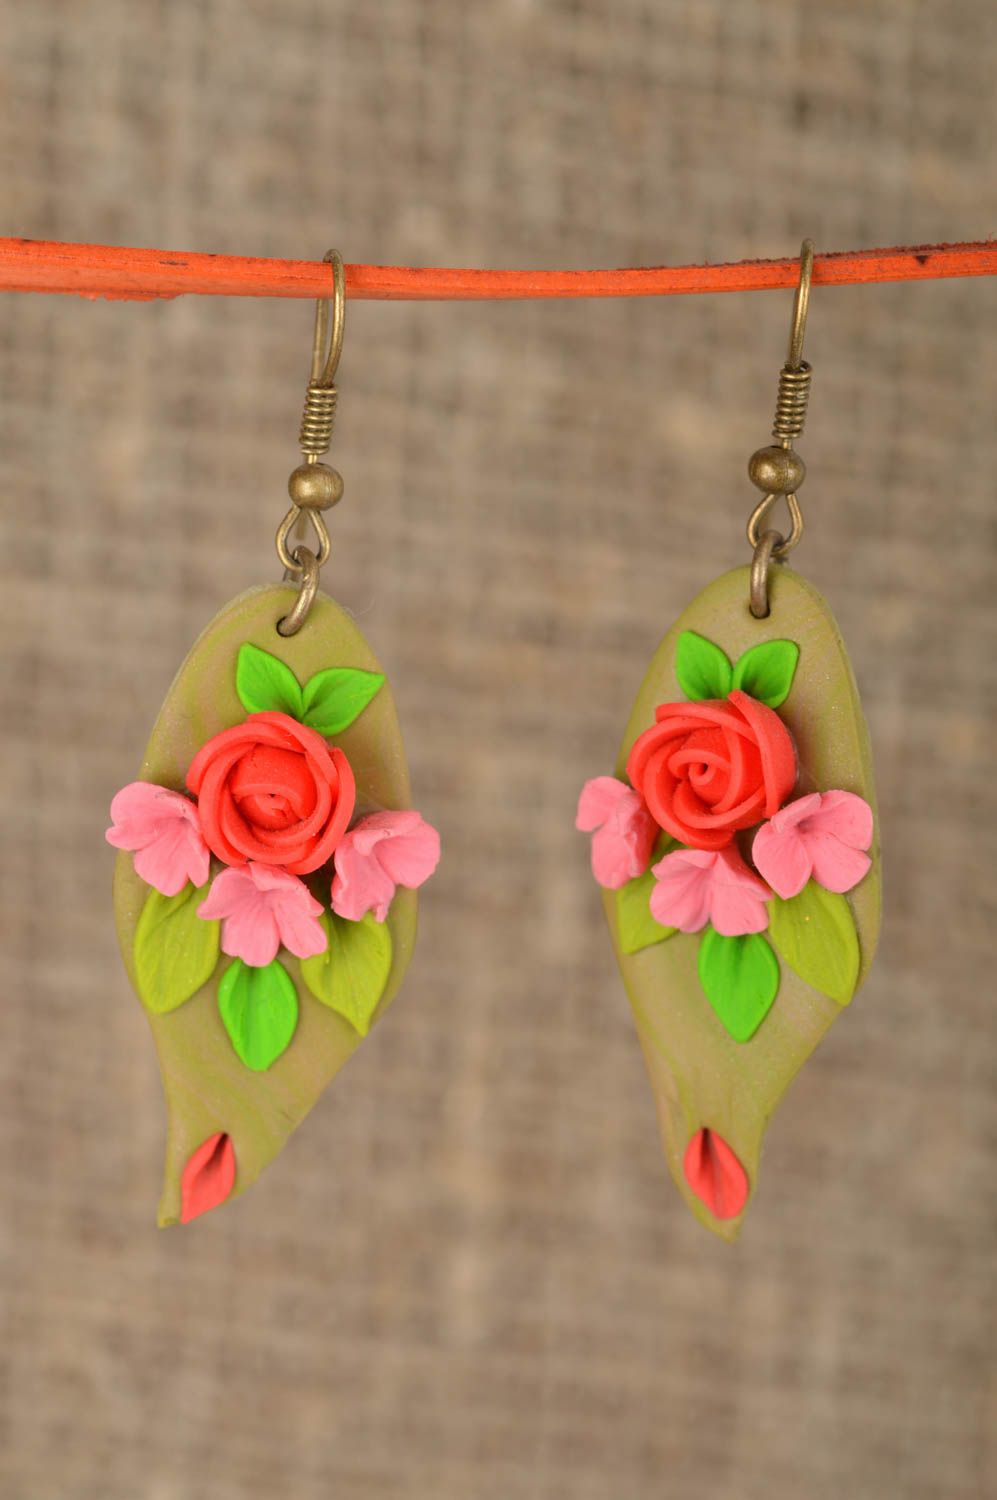 Polymer clay handmade designer earrings with flowers stylish summer accessory photo 1